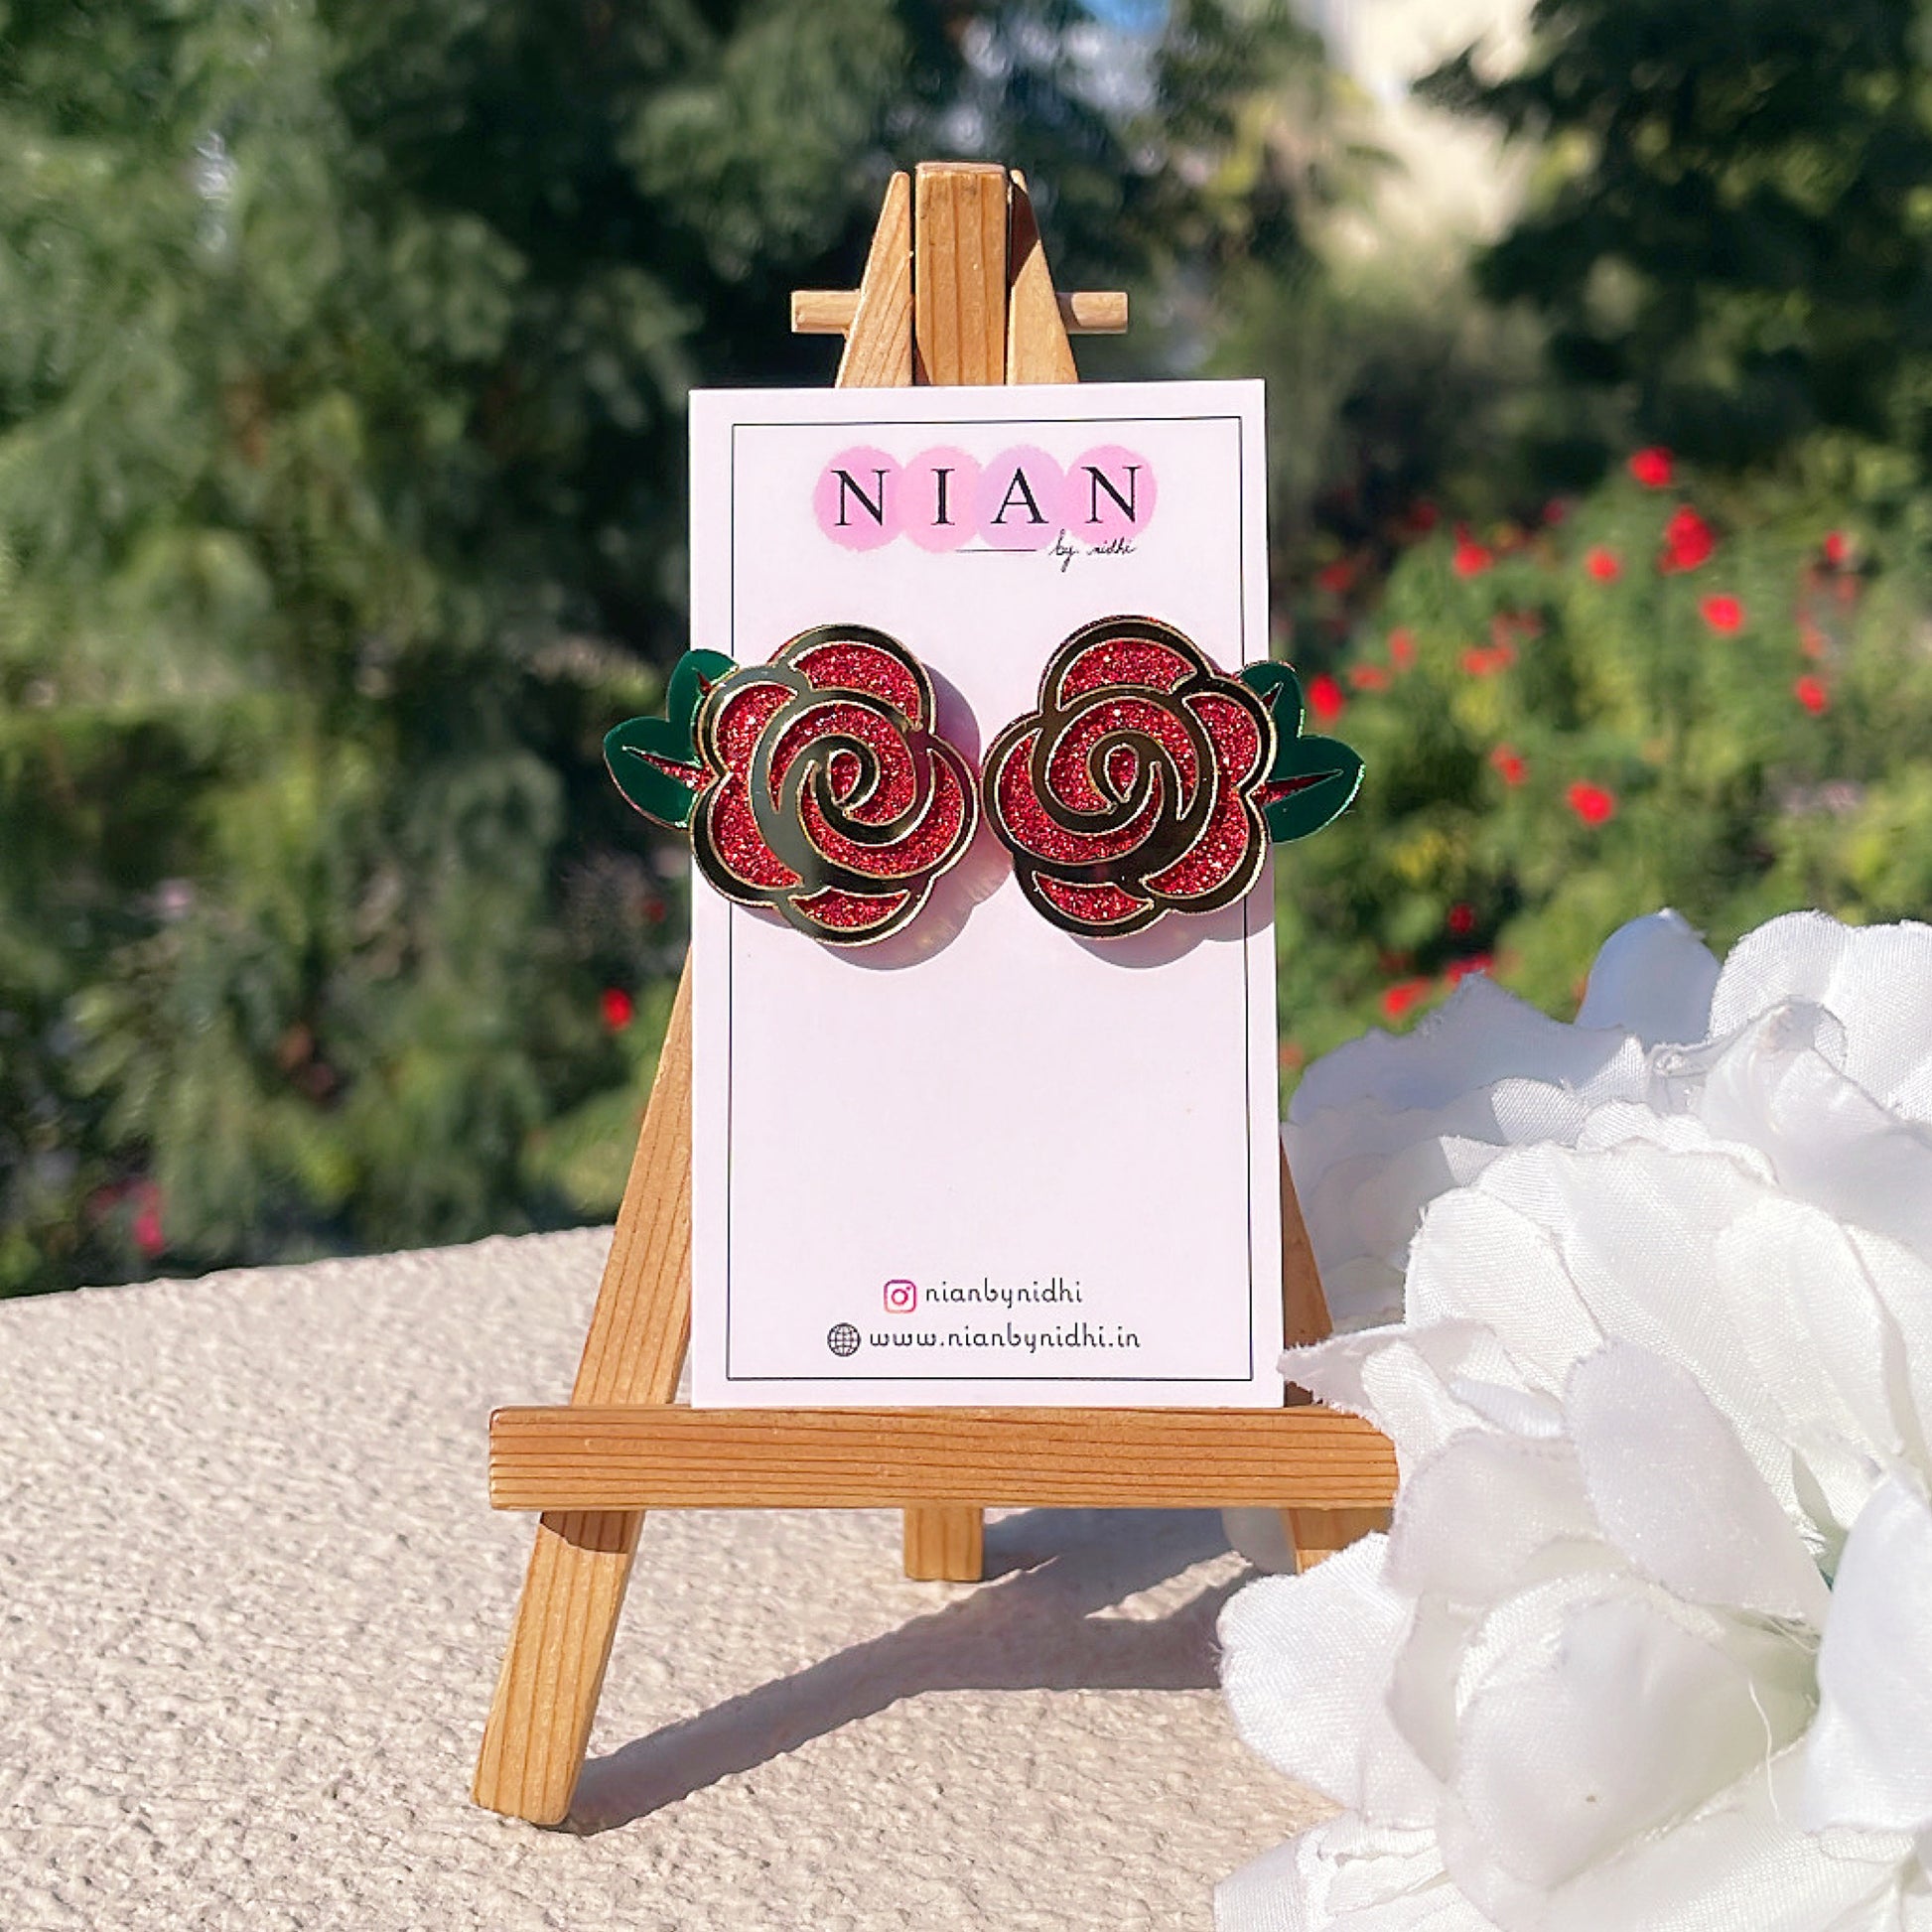 Ravishing Rose Earrings - Shimmer Red, Glossy Golden and Green - Nian by Nidhi - placed in a white and green background